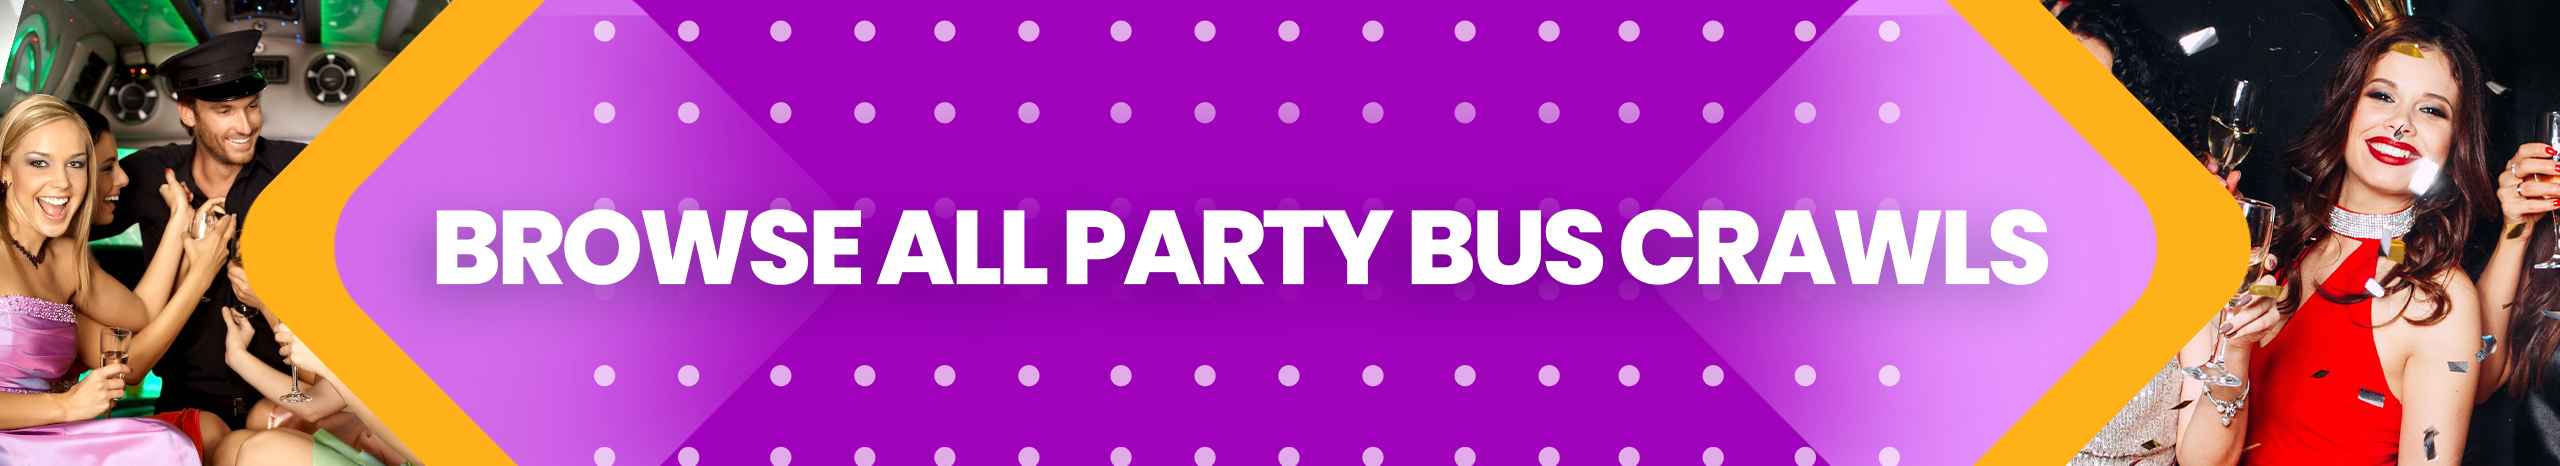 all-party-bus-crawls-web-banner